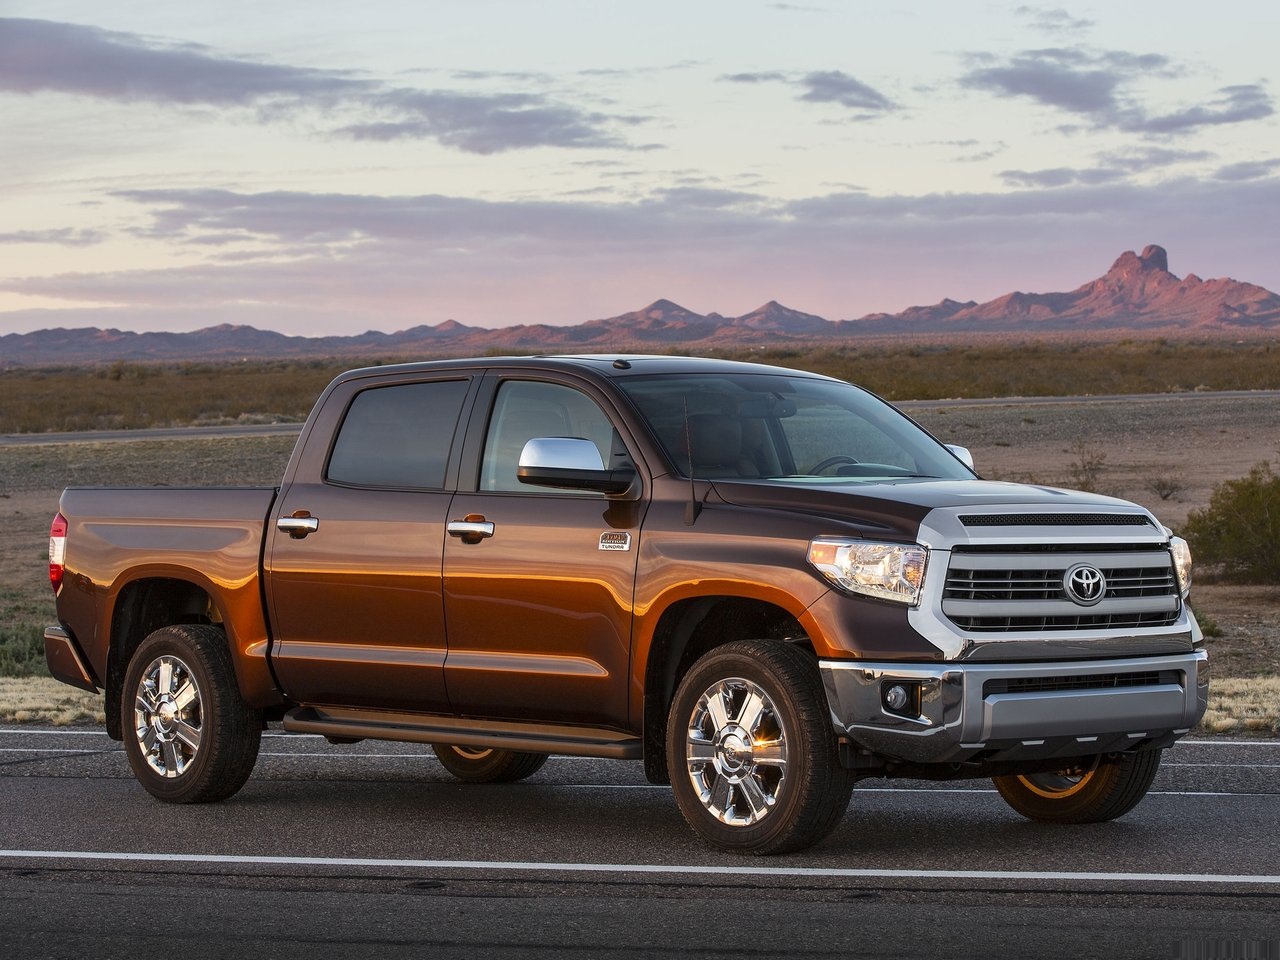 Toyota Tundra Wallpaper Pictures Pics Photos Image